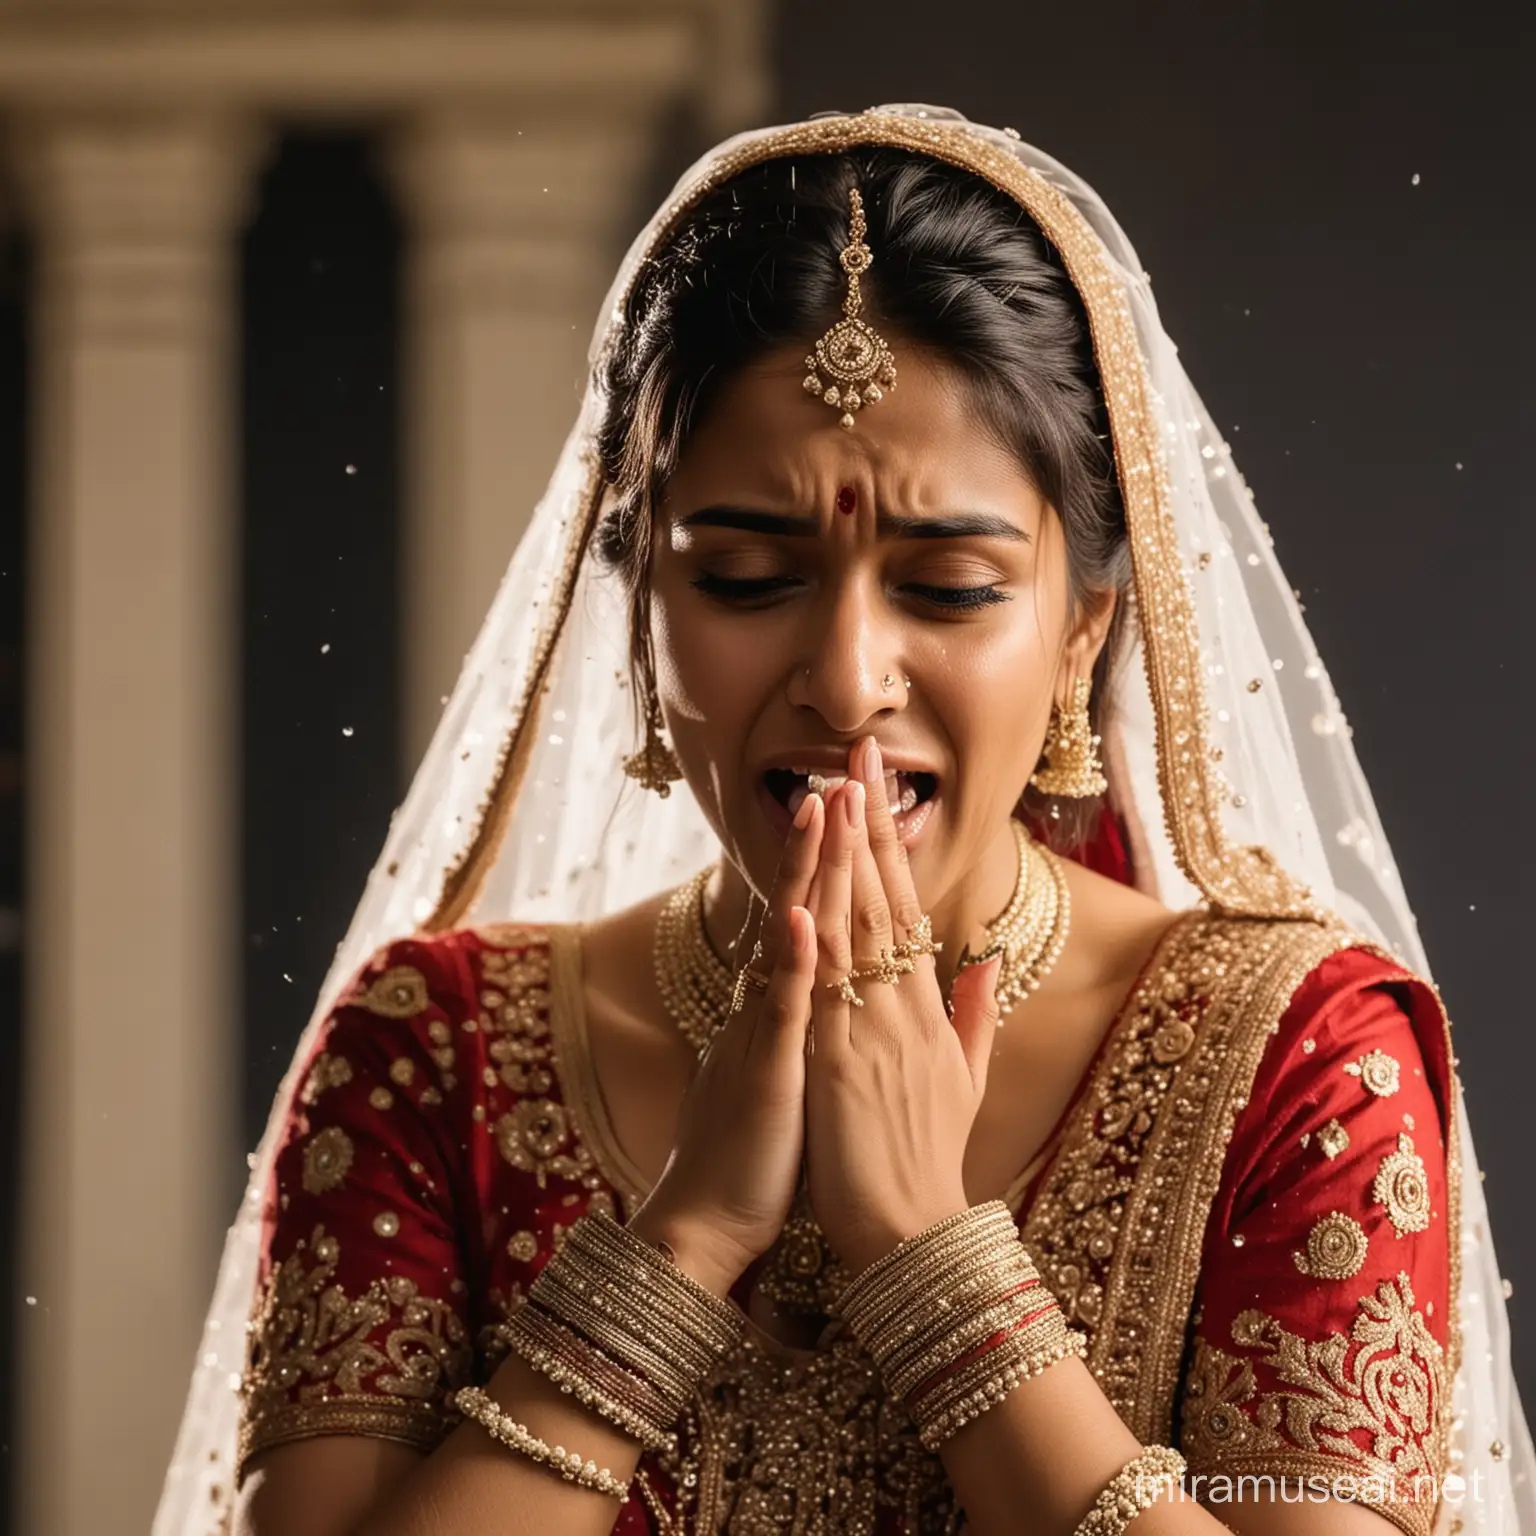 young 20 years old Indian Bride Crying with fear in the stage